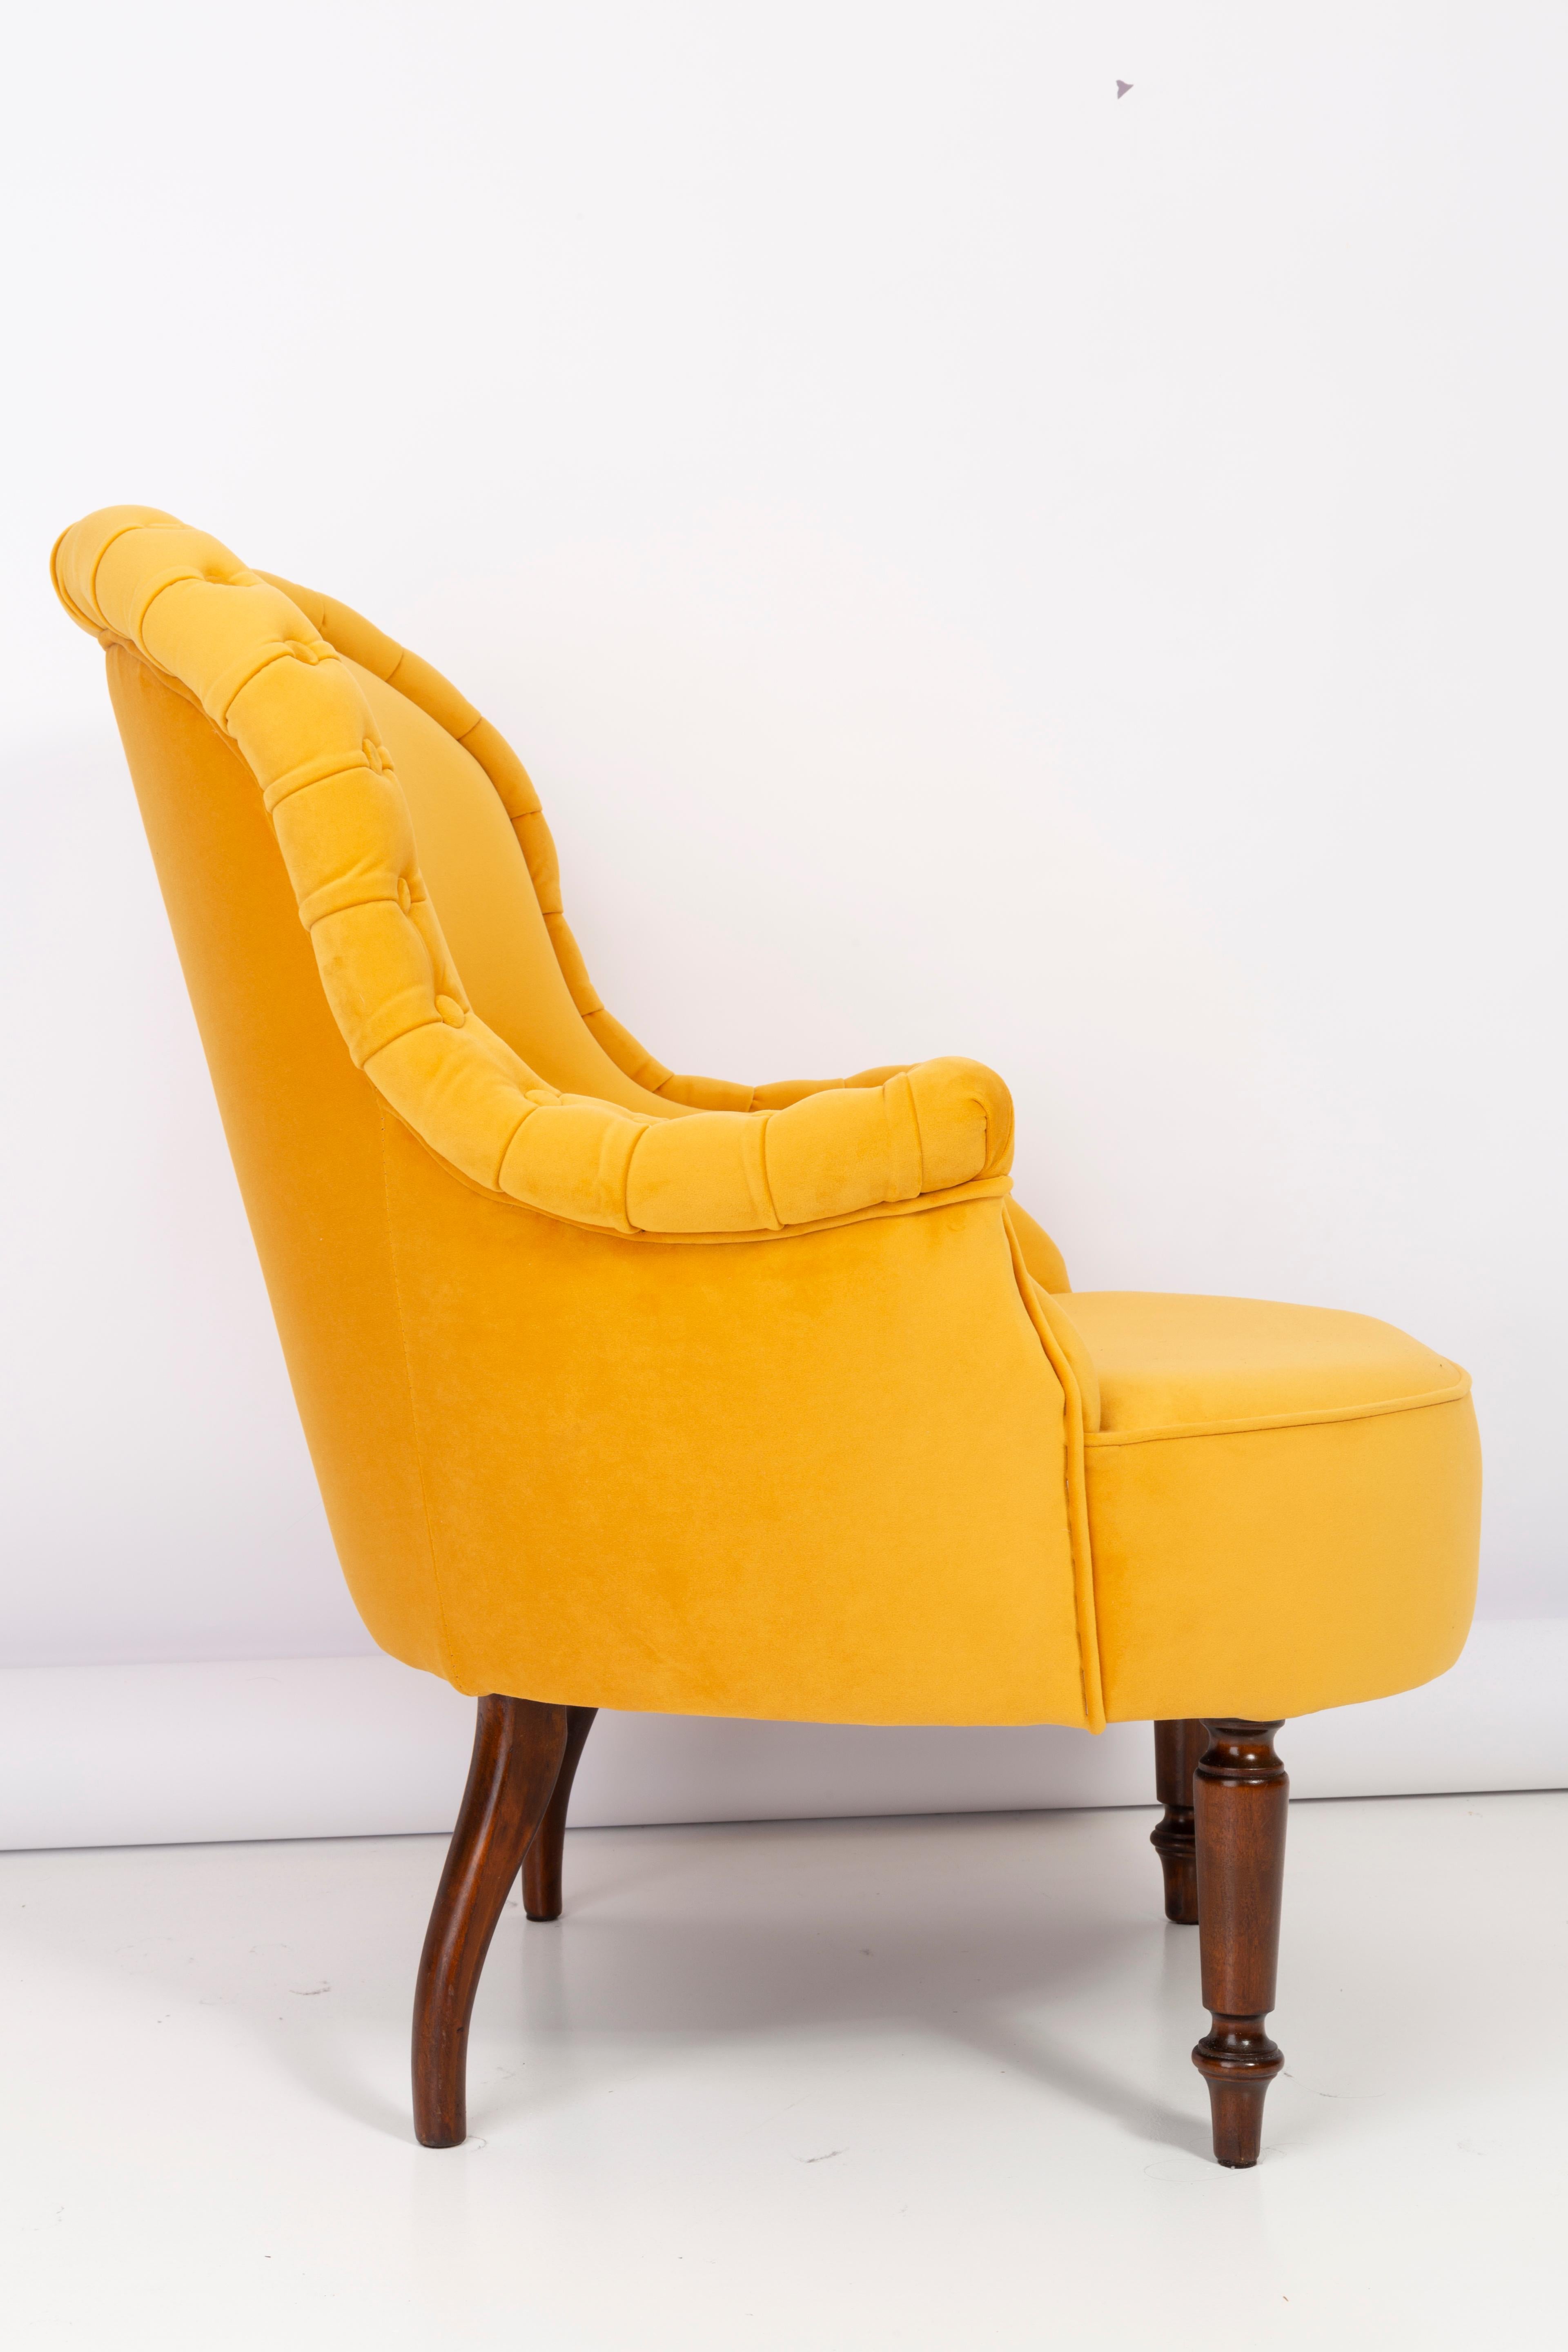 German armchair produced in the 1930s in Berlin. The armchair is after a thorough renovation of upholstery and carpentry. The wooden legs are thoroughly cleaned and covered with a semi-matte varnish in the color of a nut. The upholstery is made of